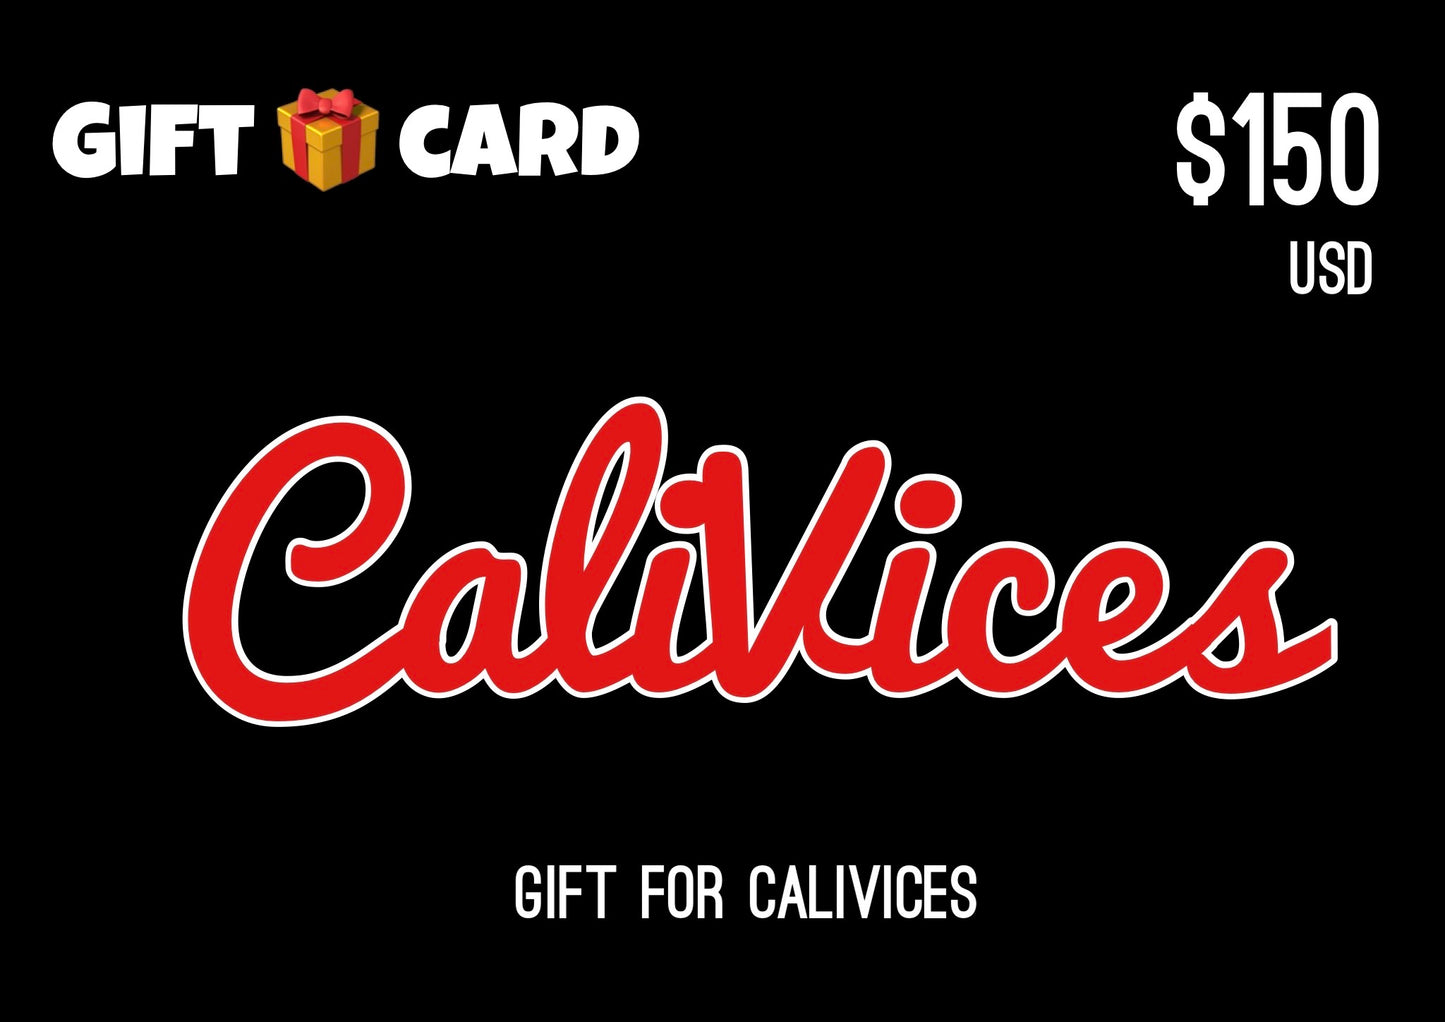 CALIFORNIA VICES GIFT CARDS